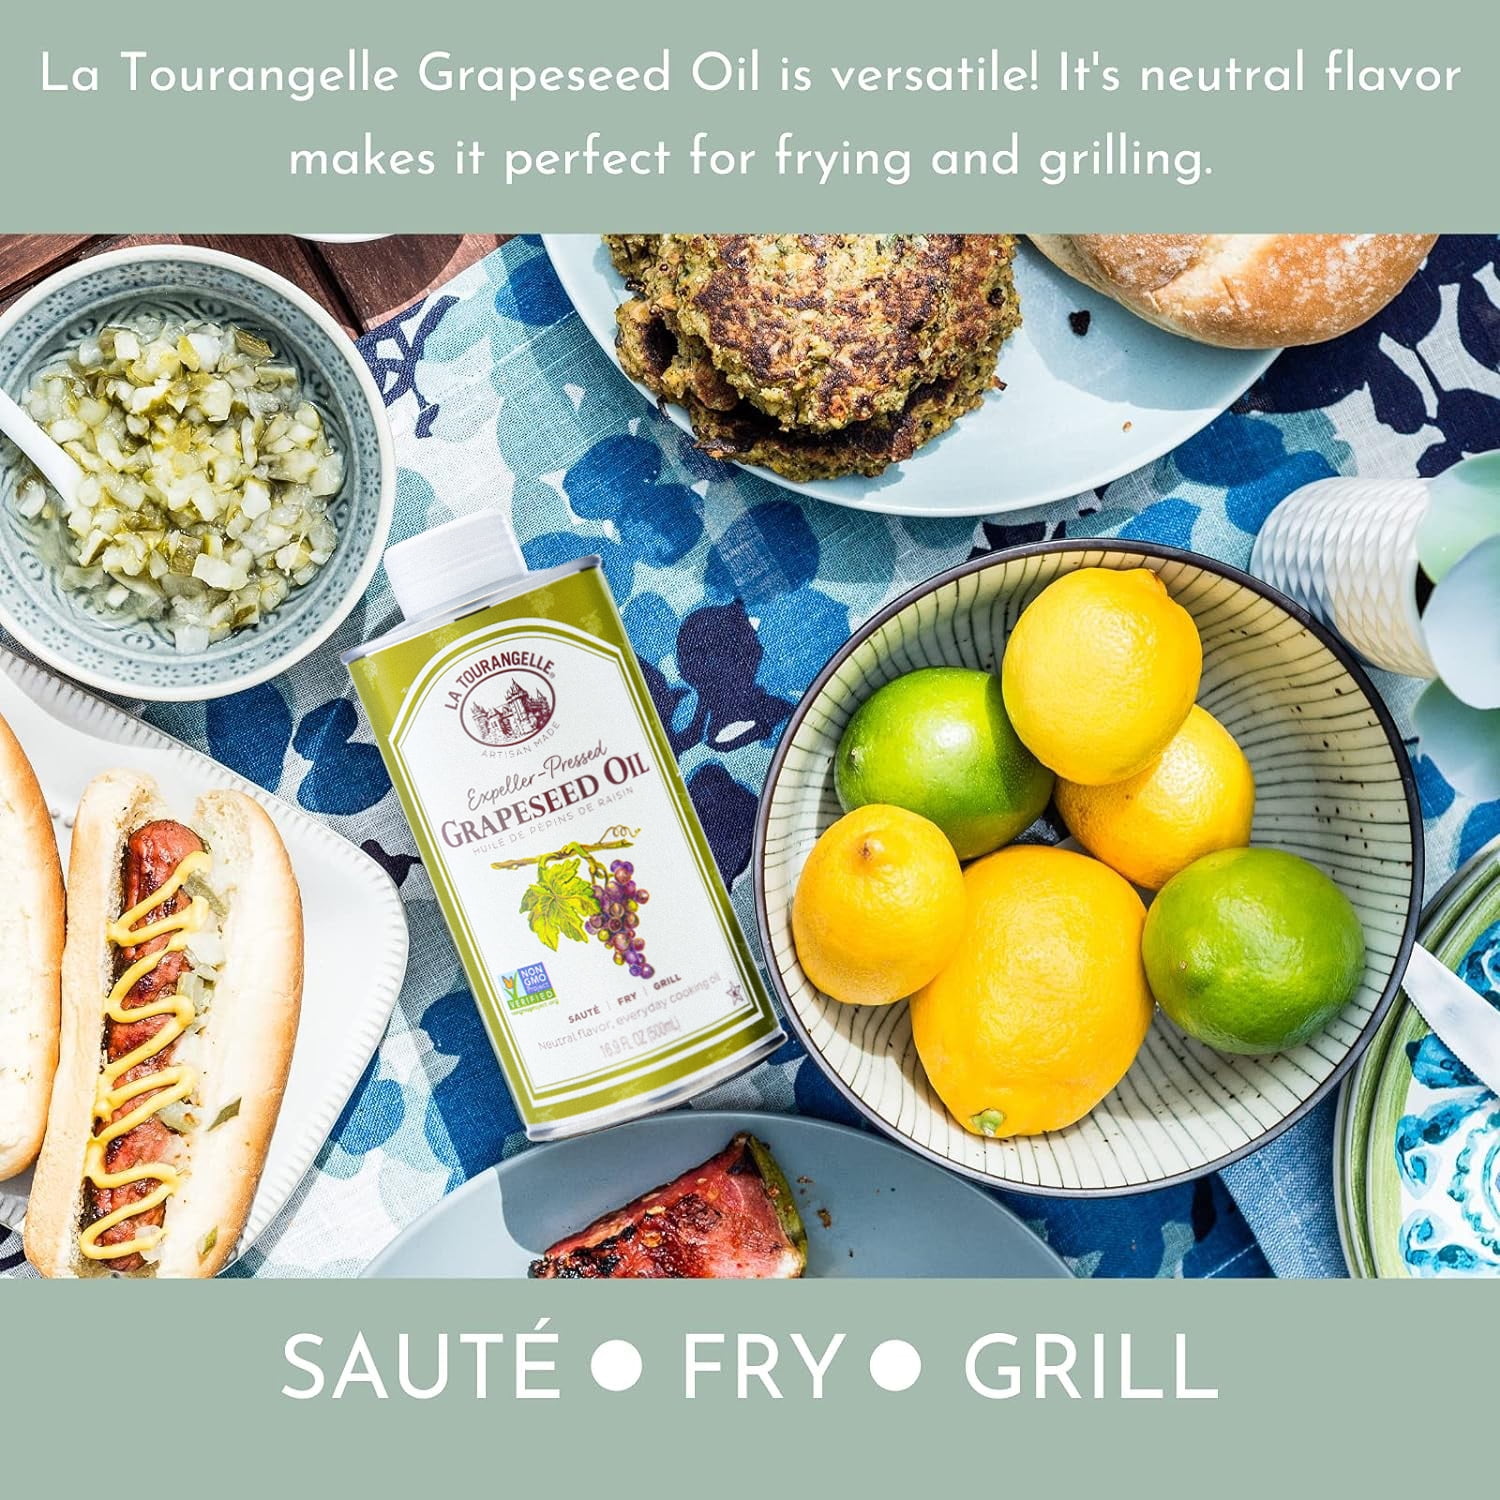 La Tourangelle Oil Grapeseed 16.9 FO (Pack Of 6), Case of 6 - 16.9 FO each  - Fry's Food Stores